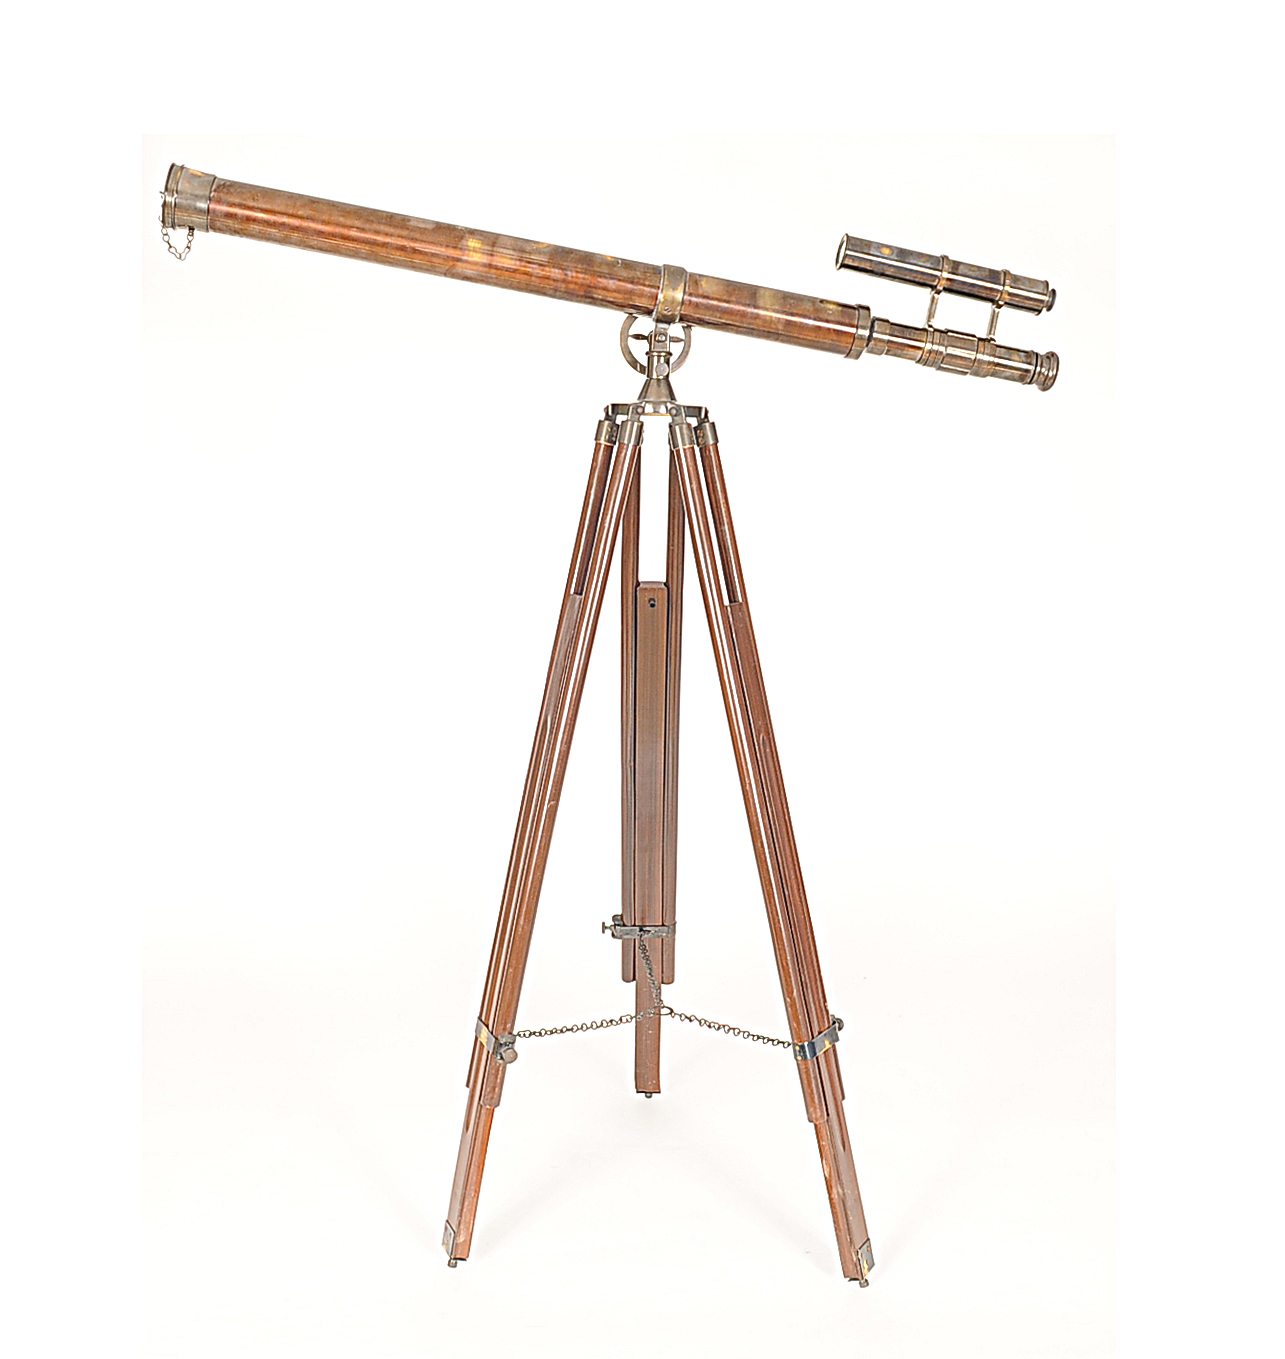 2.6" x 40" x 62" Telescope with Stand